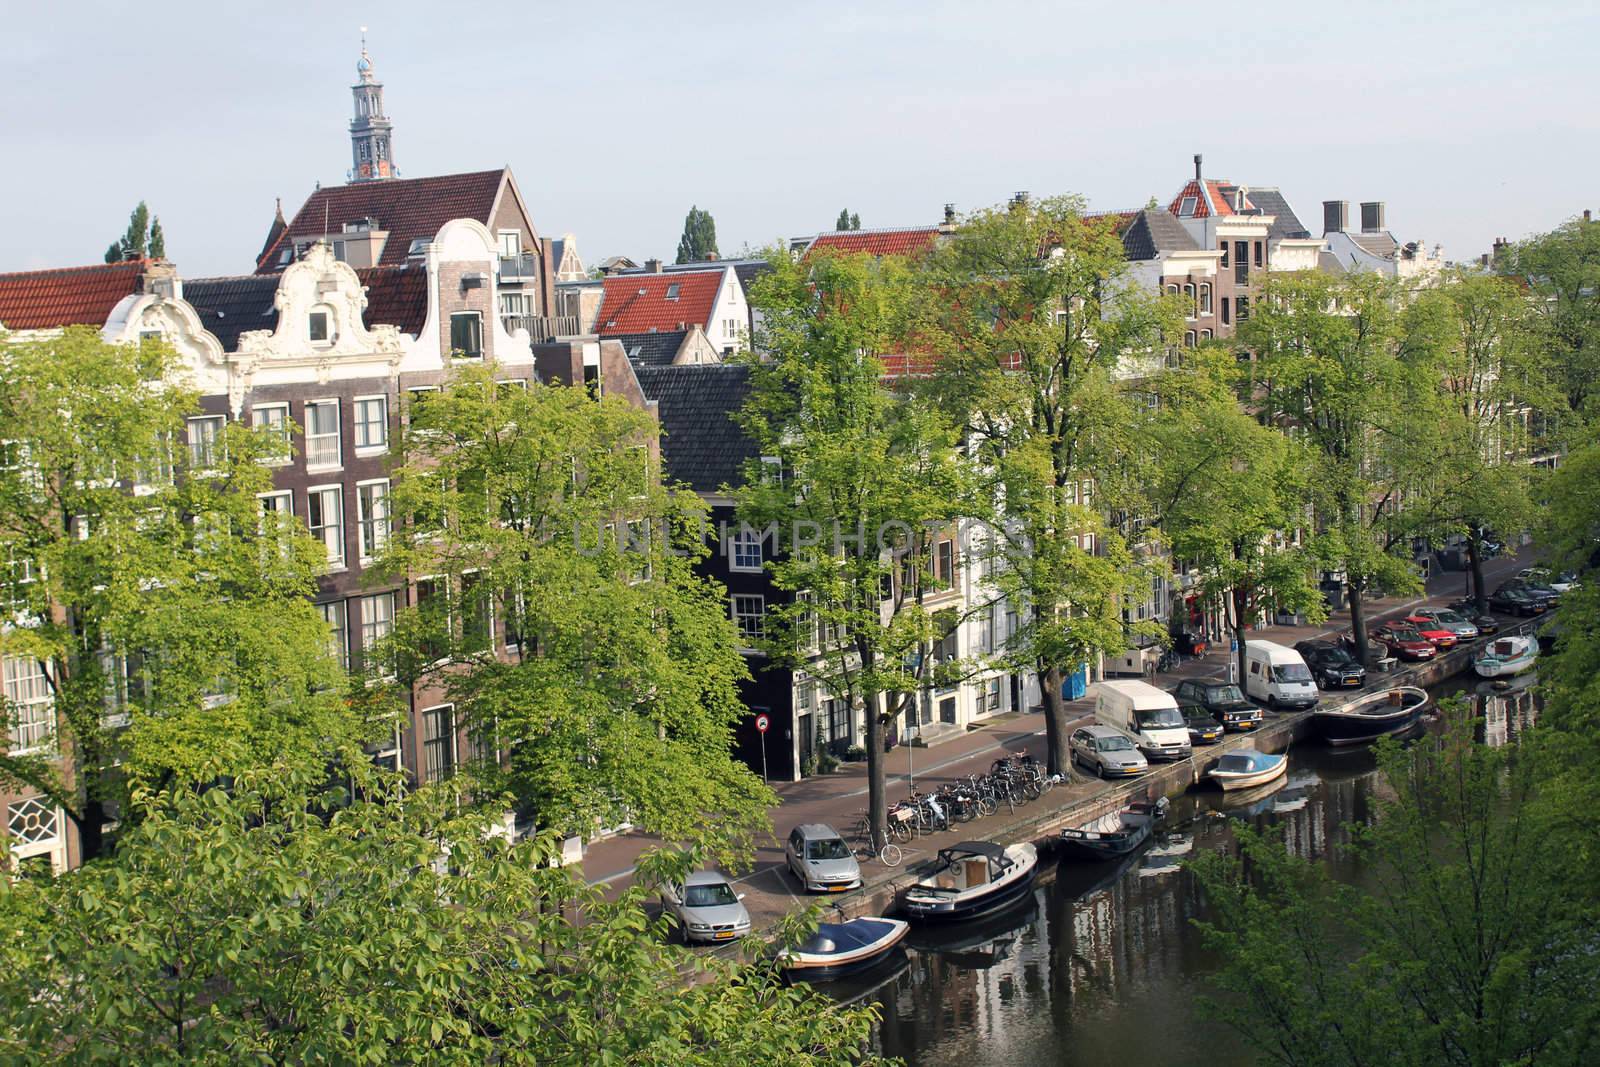 amsterdam canal and houses viewed from a roof